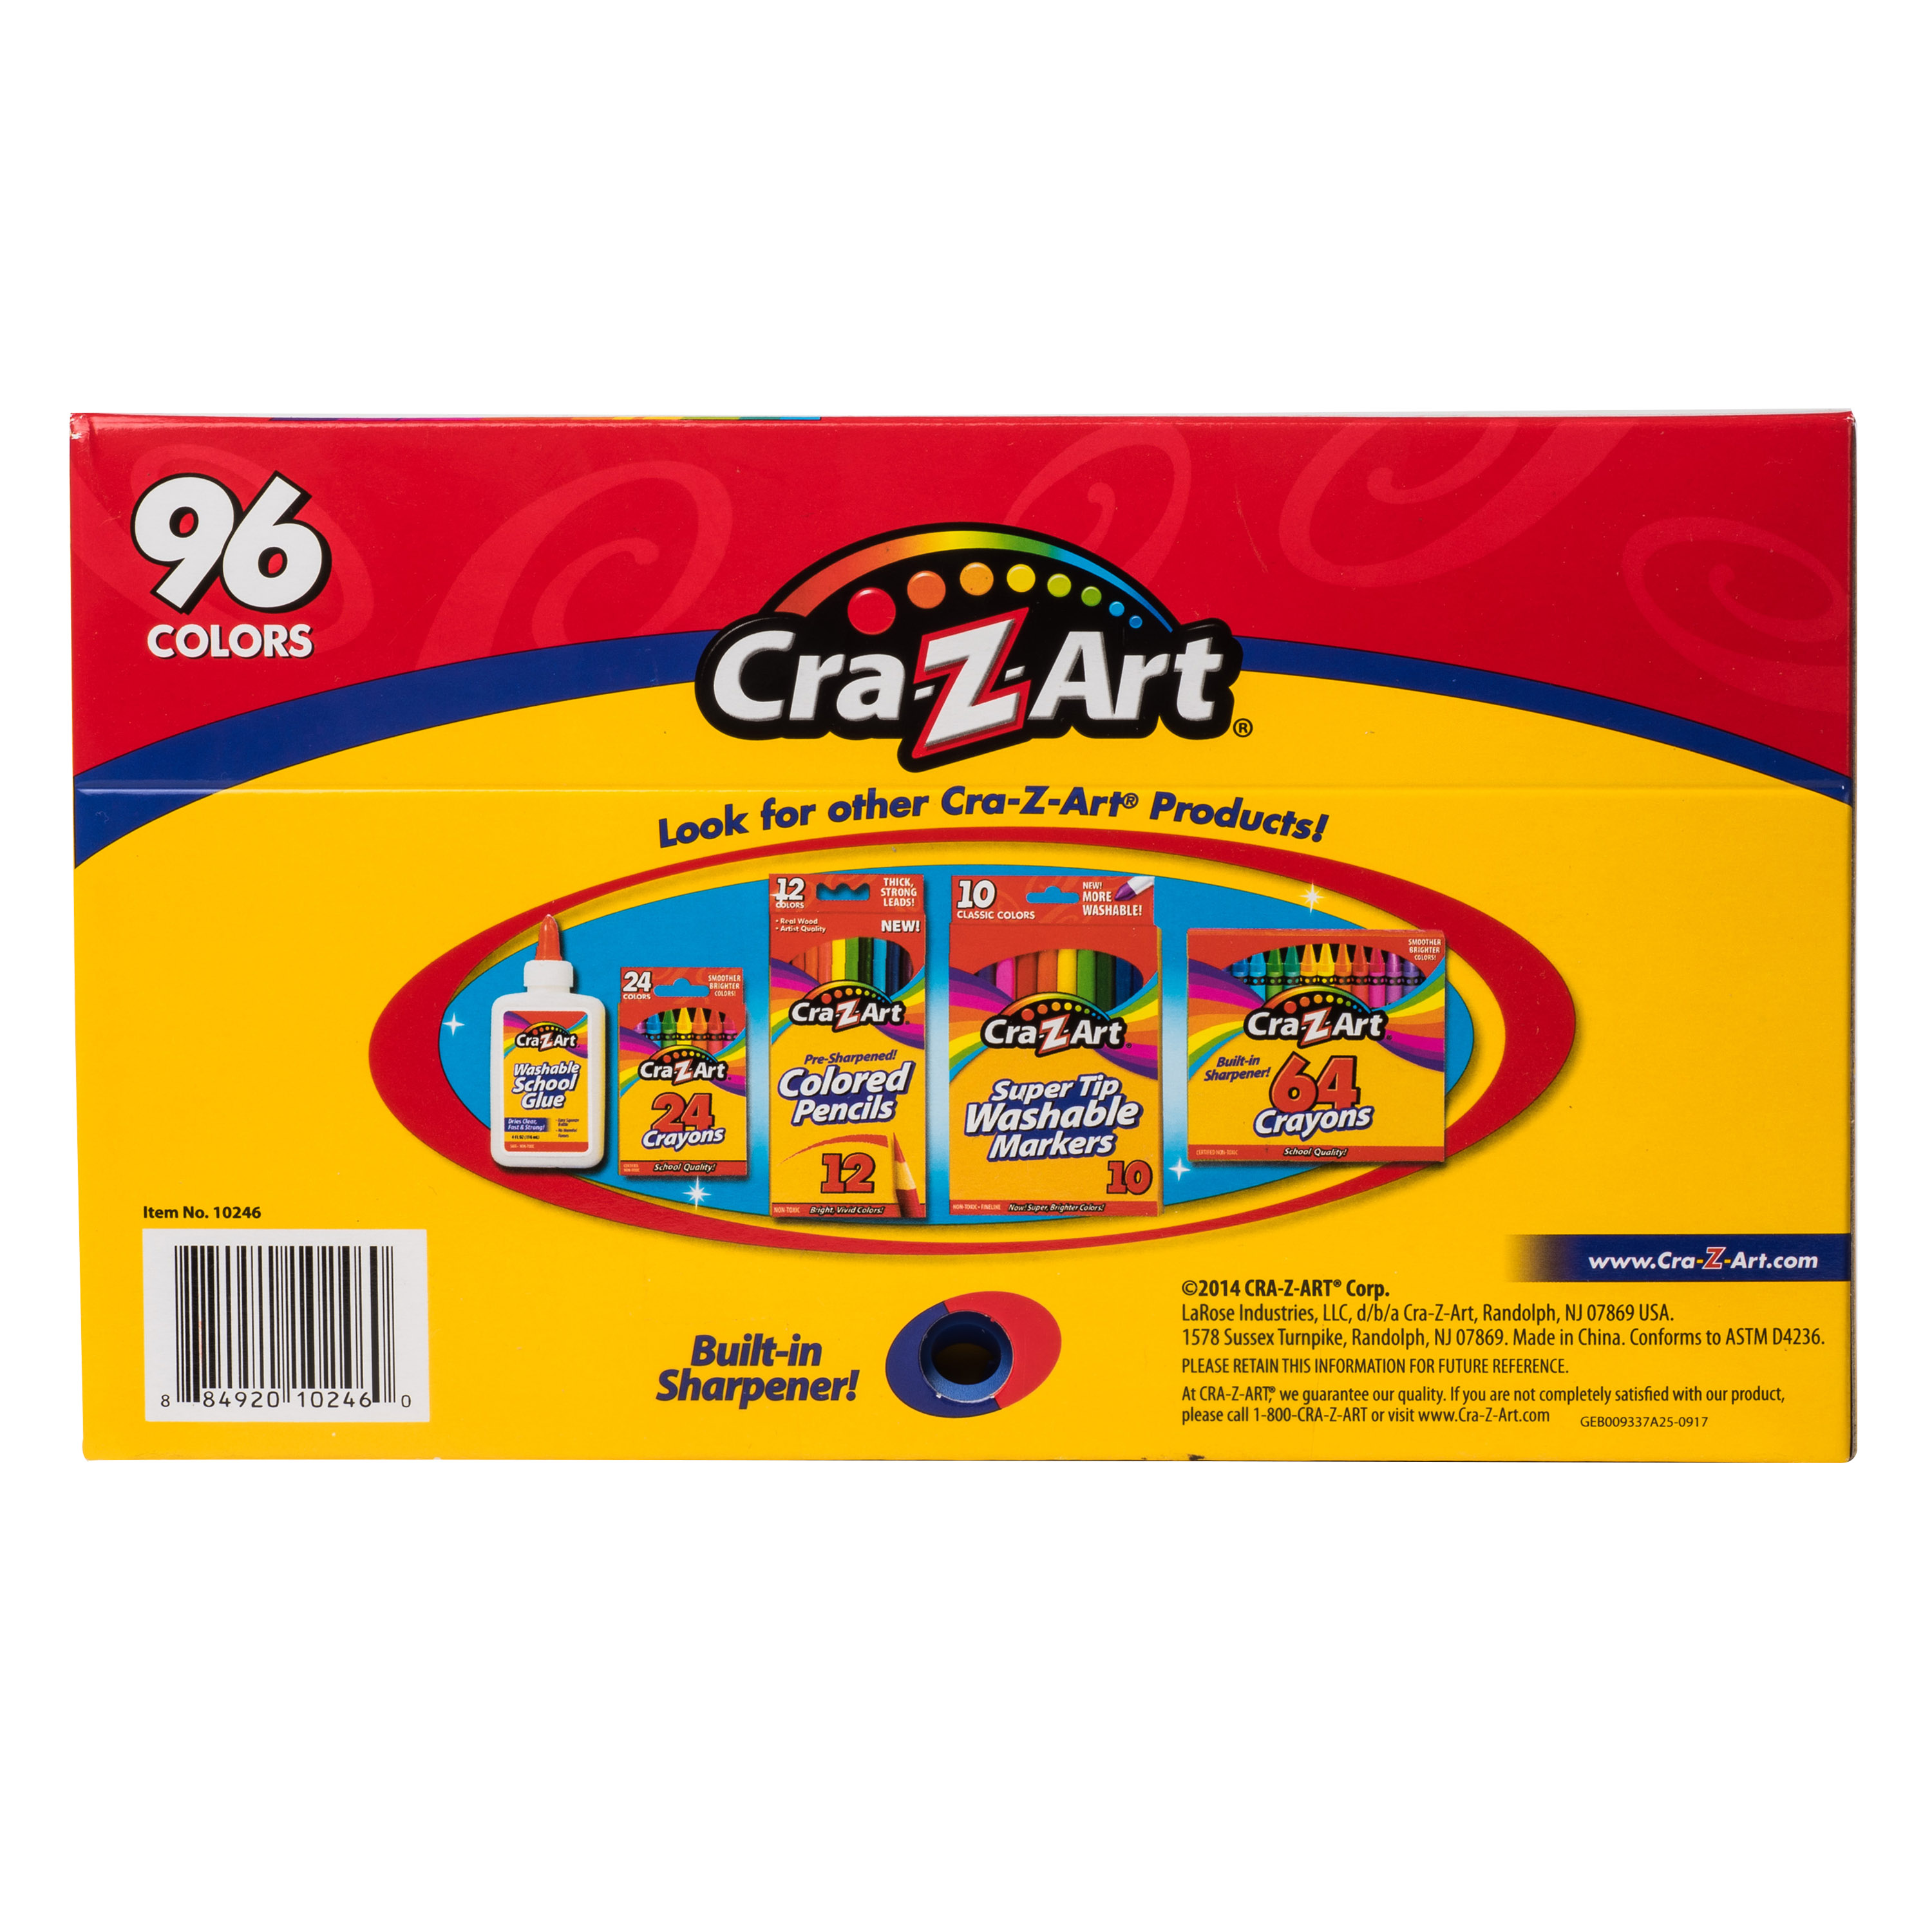 Cra-Z-Art 96 Count Crayons, Bulk Pack with Built-in Sharpener, Multicolor, Back to School - image 4 of 10